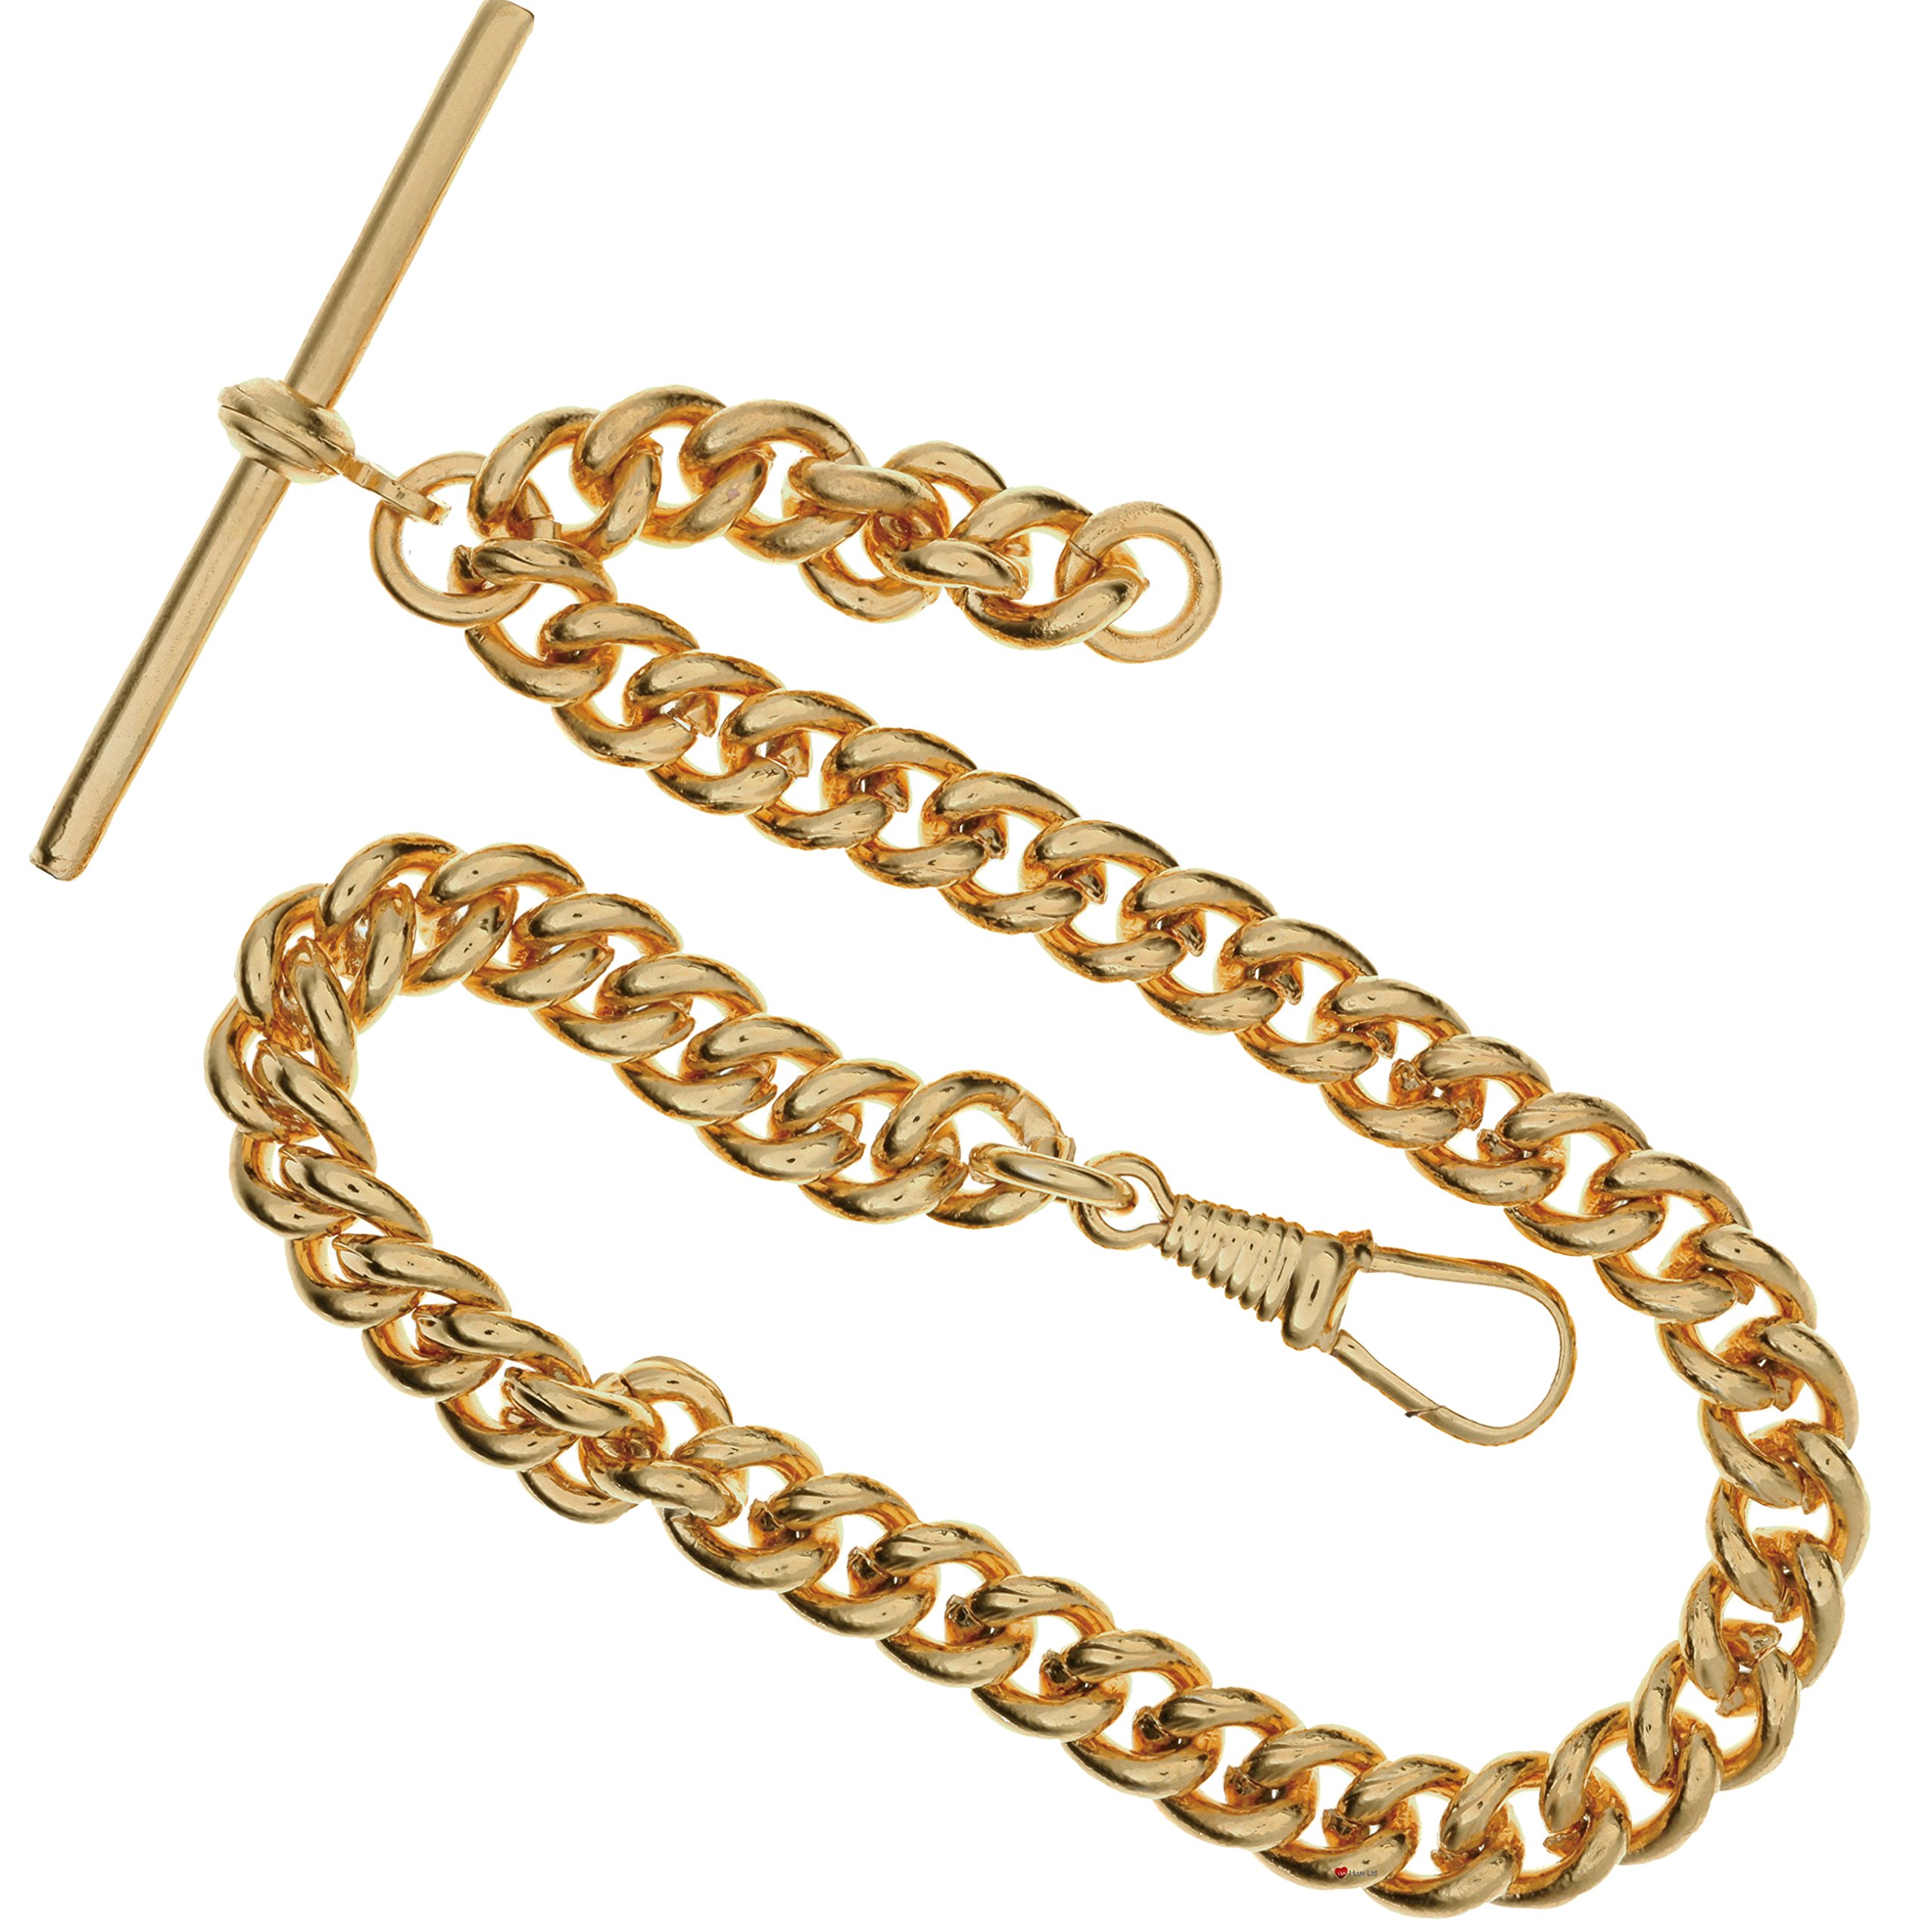 I LUV LTD Single Albert Chain for Pocket Watch - Heavyweight Rolled Gold Finish